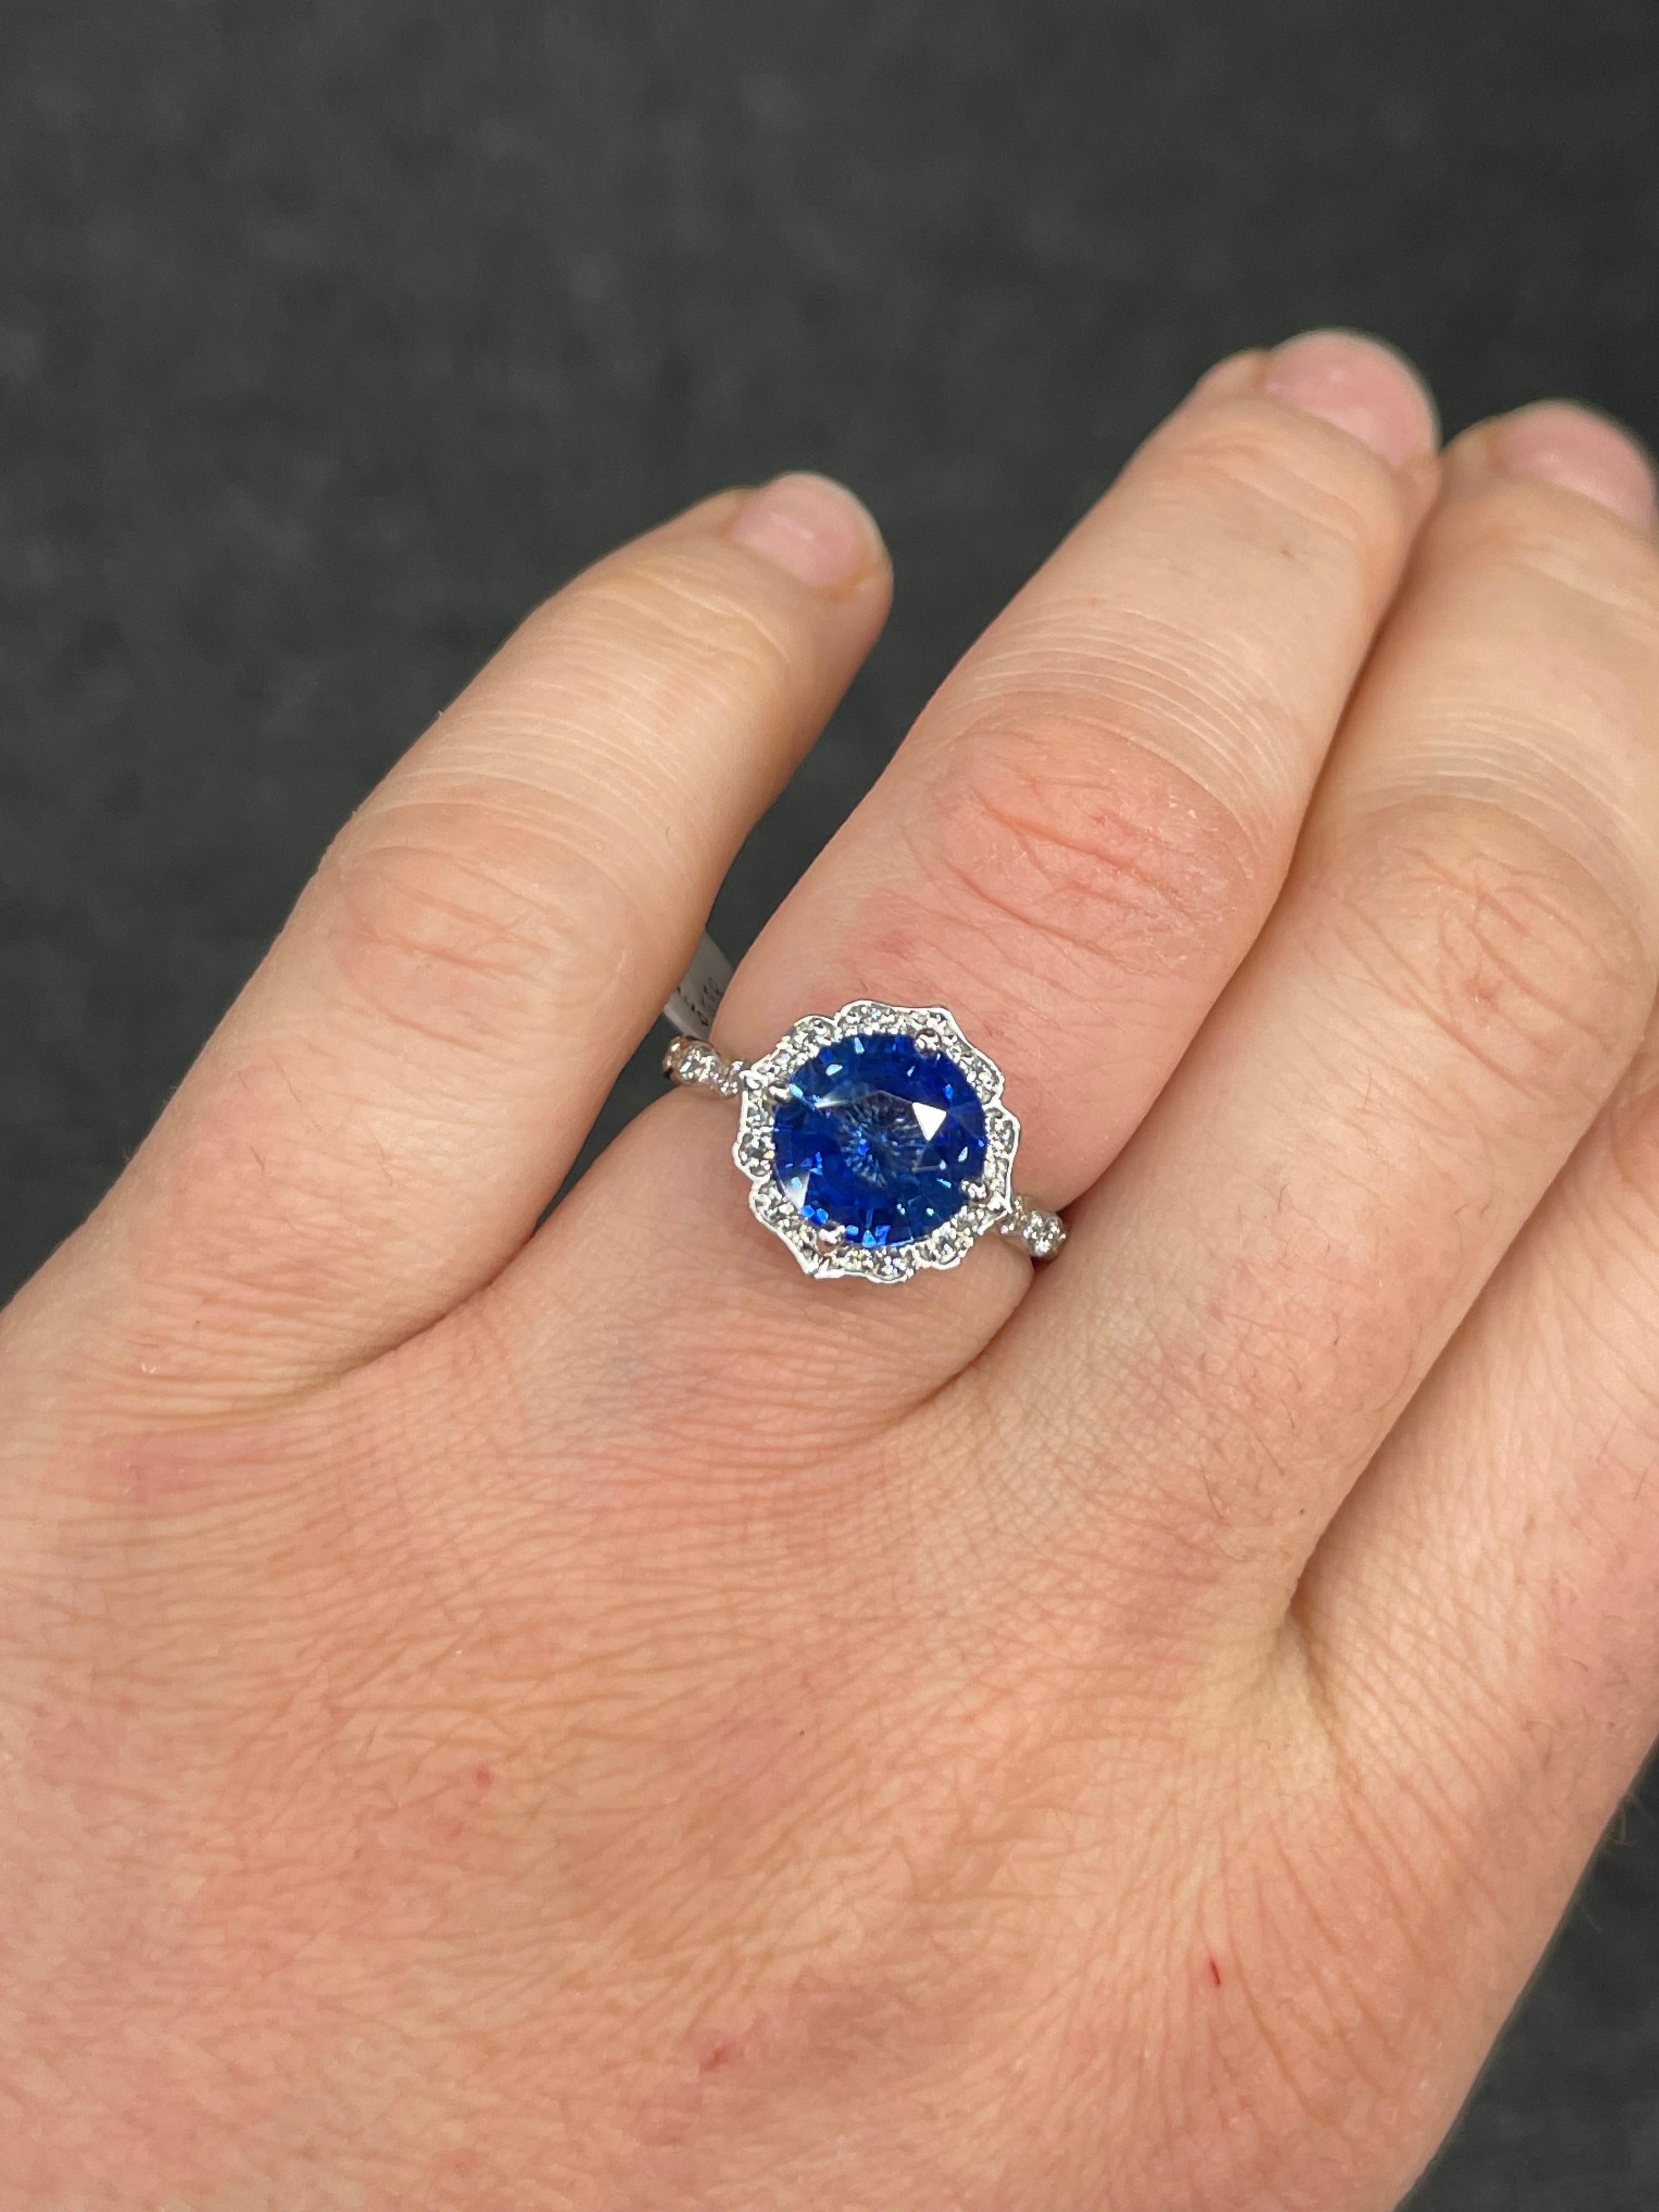 Round Cut Antique Inspired Sapphire Diamond Halo Ring 4.07 Carats 14 Karat White Gold For Sale